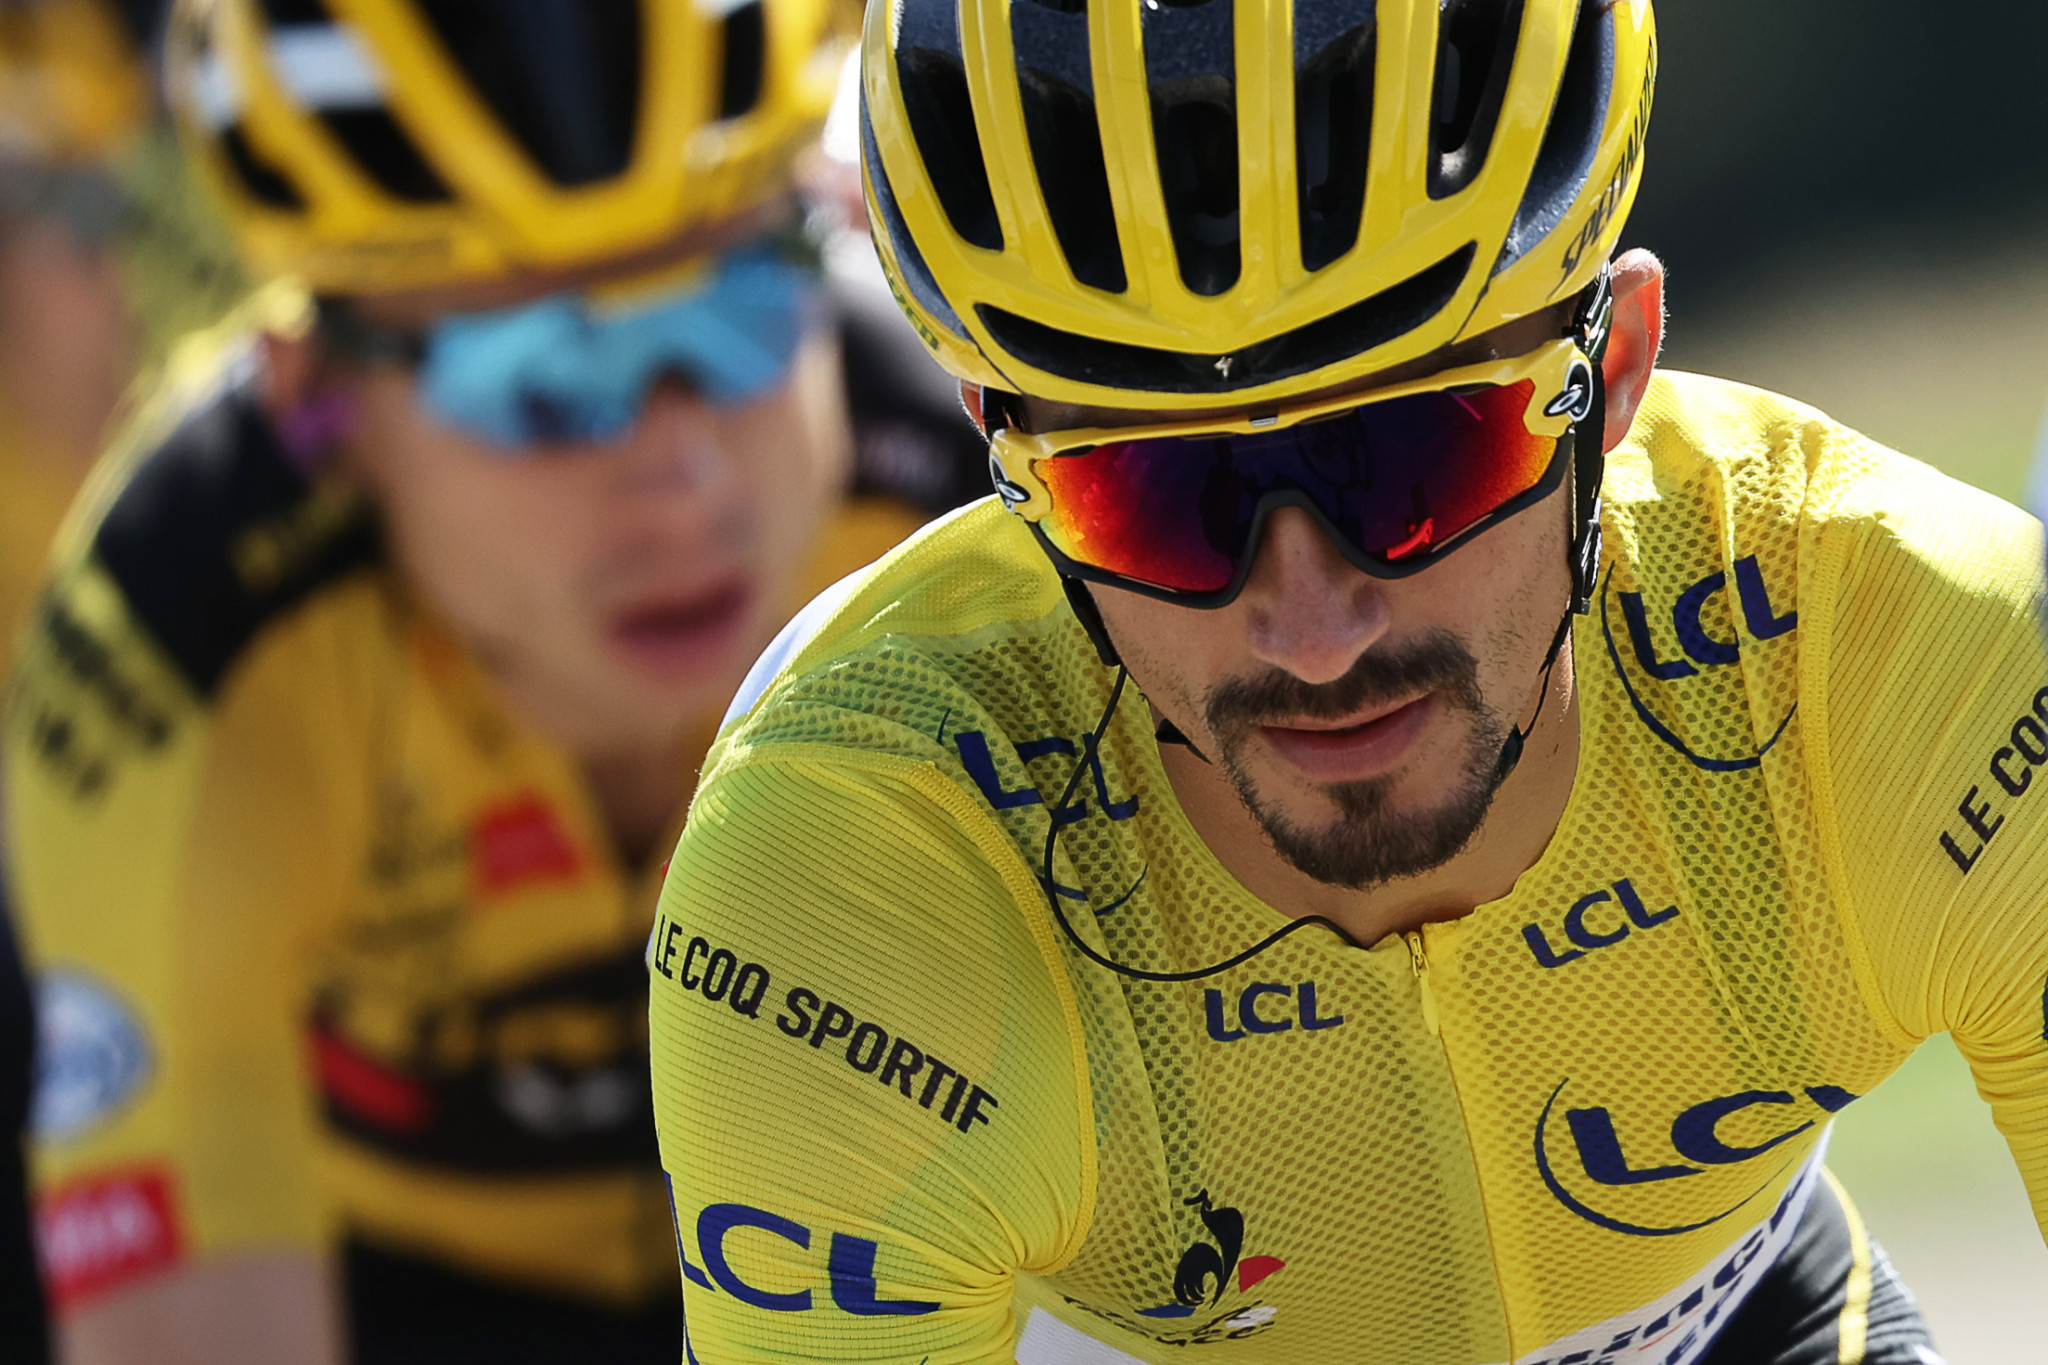 France’s Julian Alaphilippe retained the yellow jersey ©Getty Images